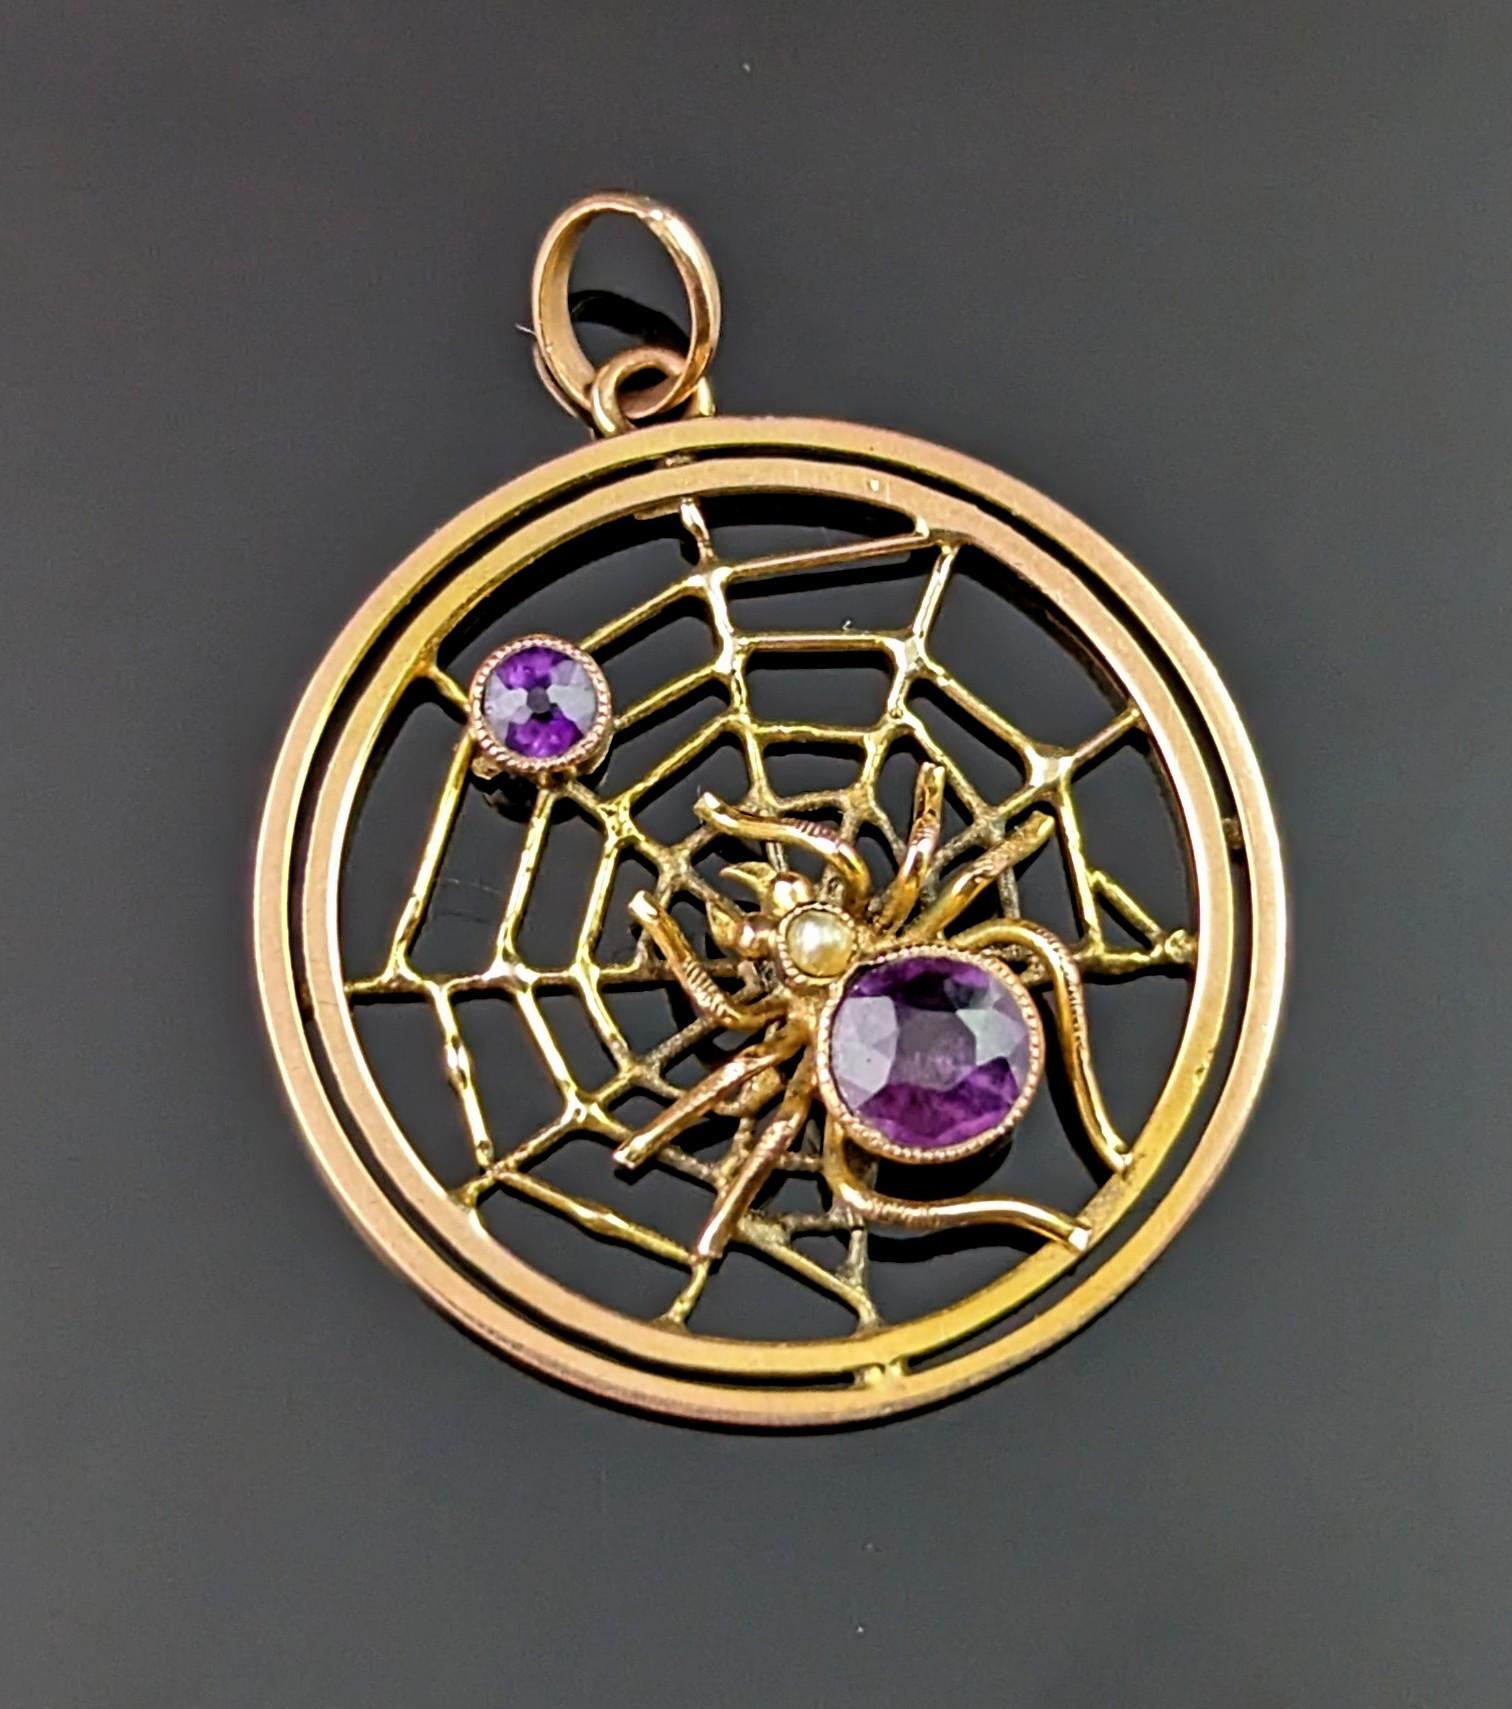 Spider lover or not you are bound to fall in love with this wonderful antique spider and spider web pendant.

The spider and spider web motifs are much harder to find in pendant form with most adorning brooches, the Victorian's began somewhat of an